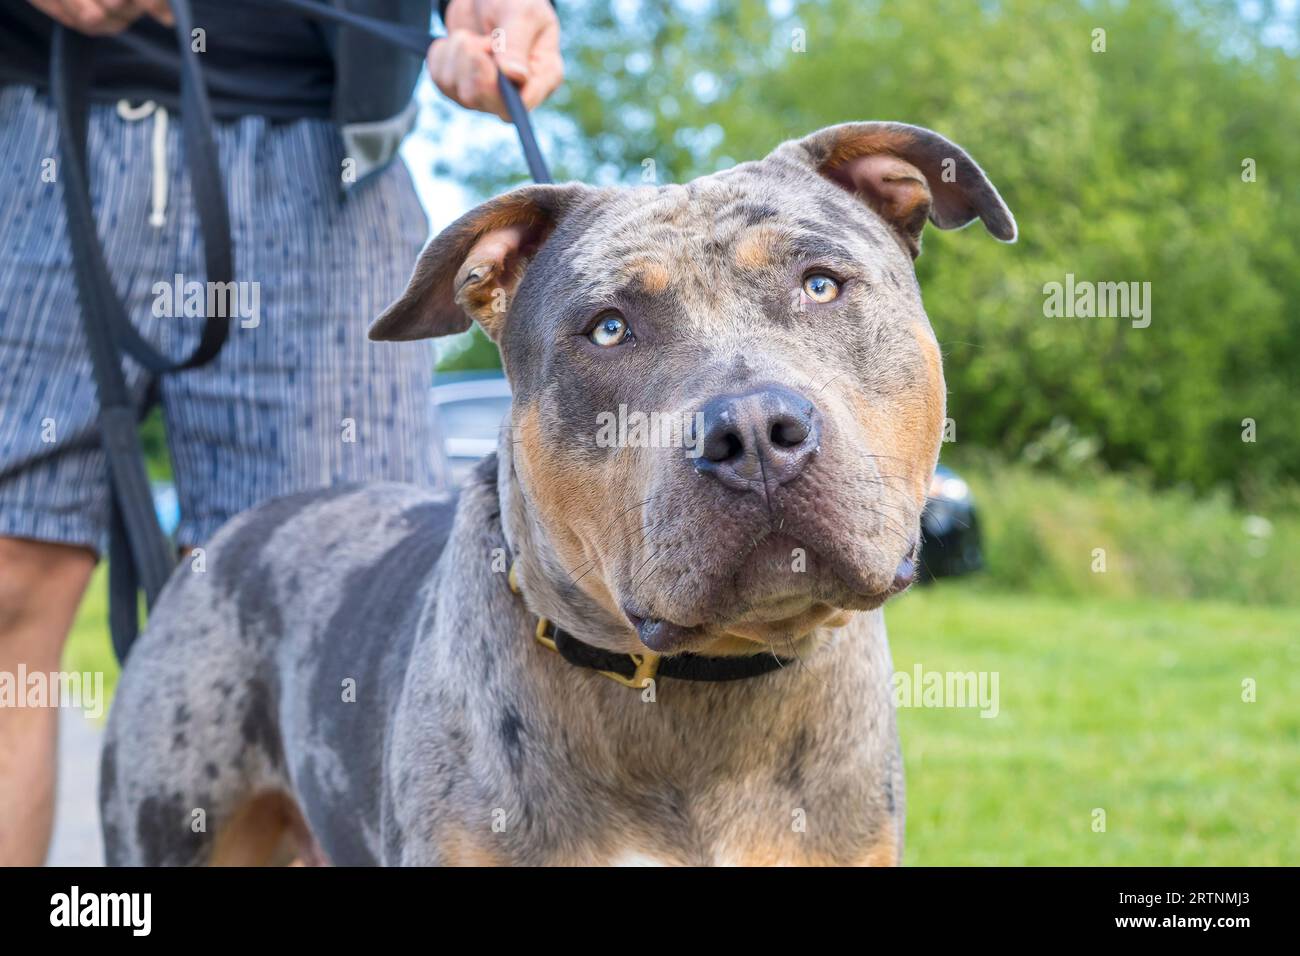 From American XL Bullies to pitbull - all the dog breeds banned in